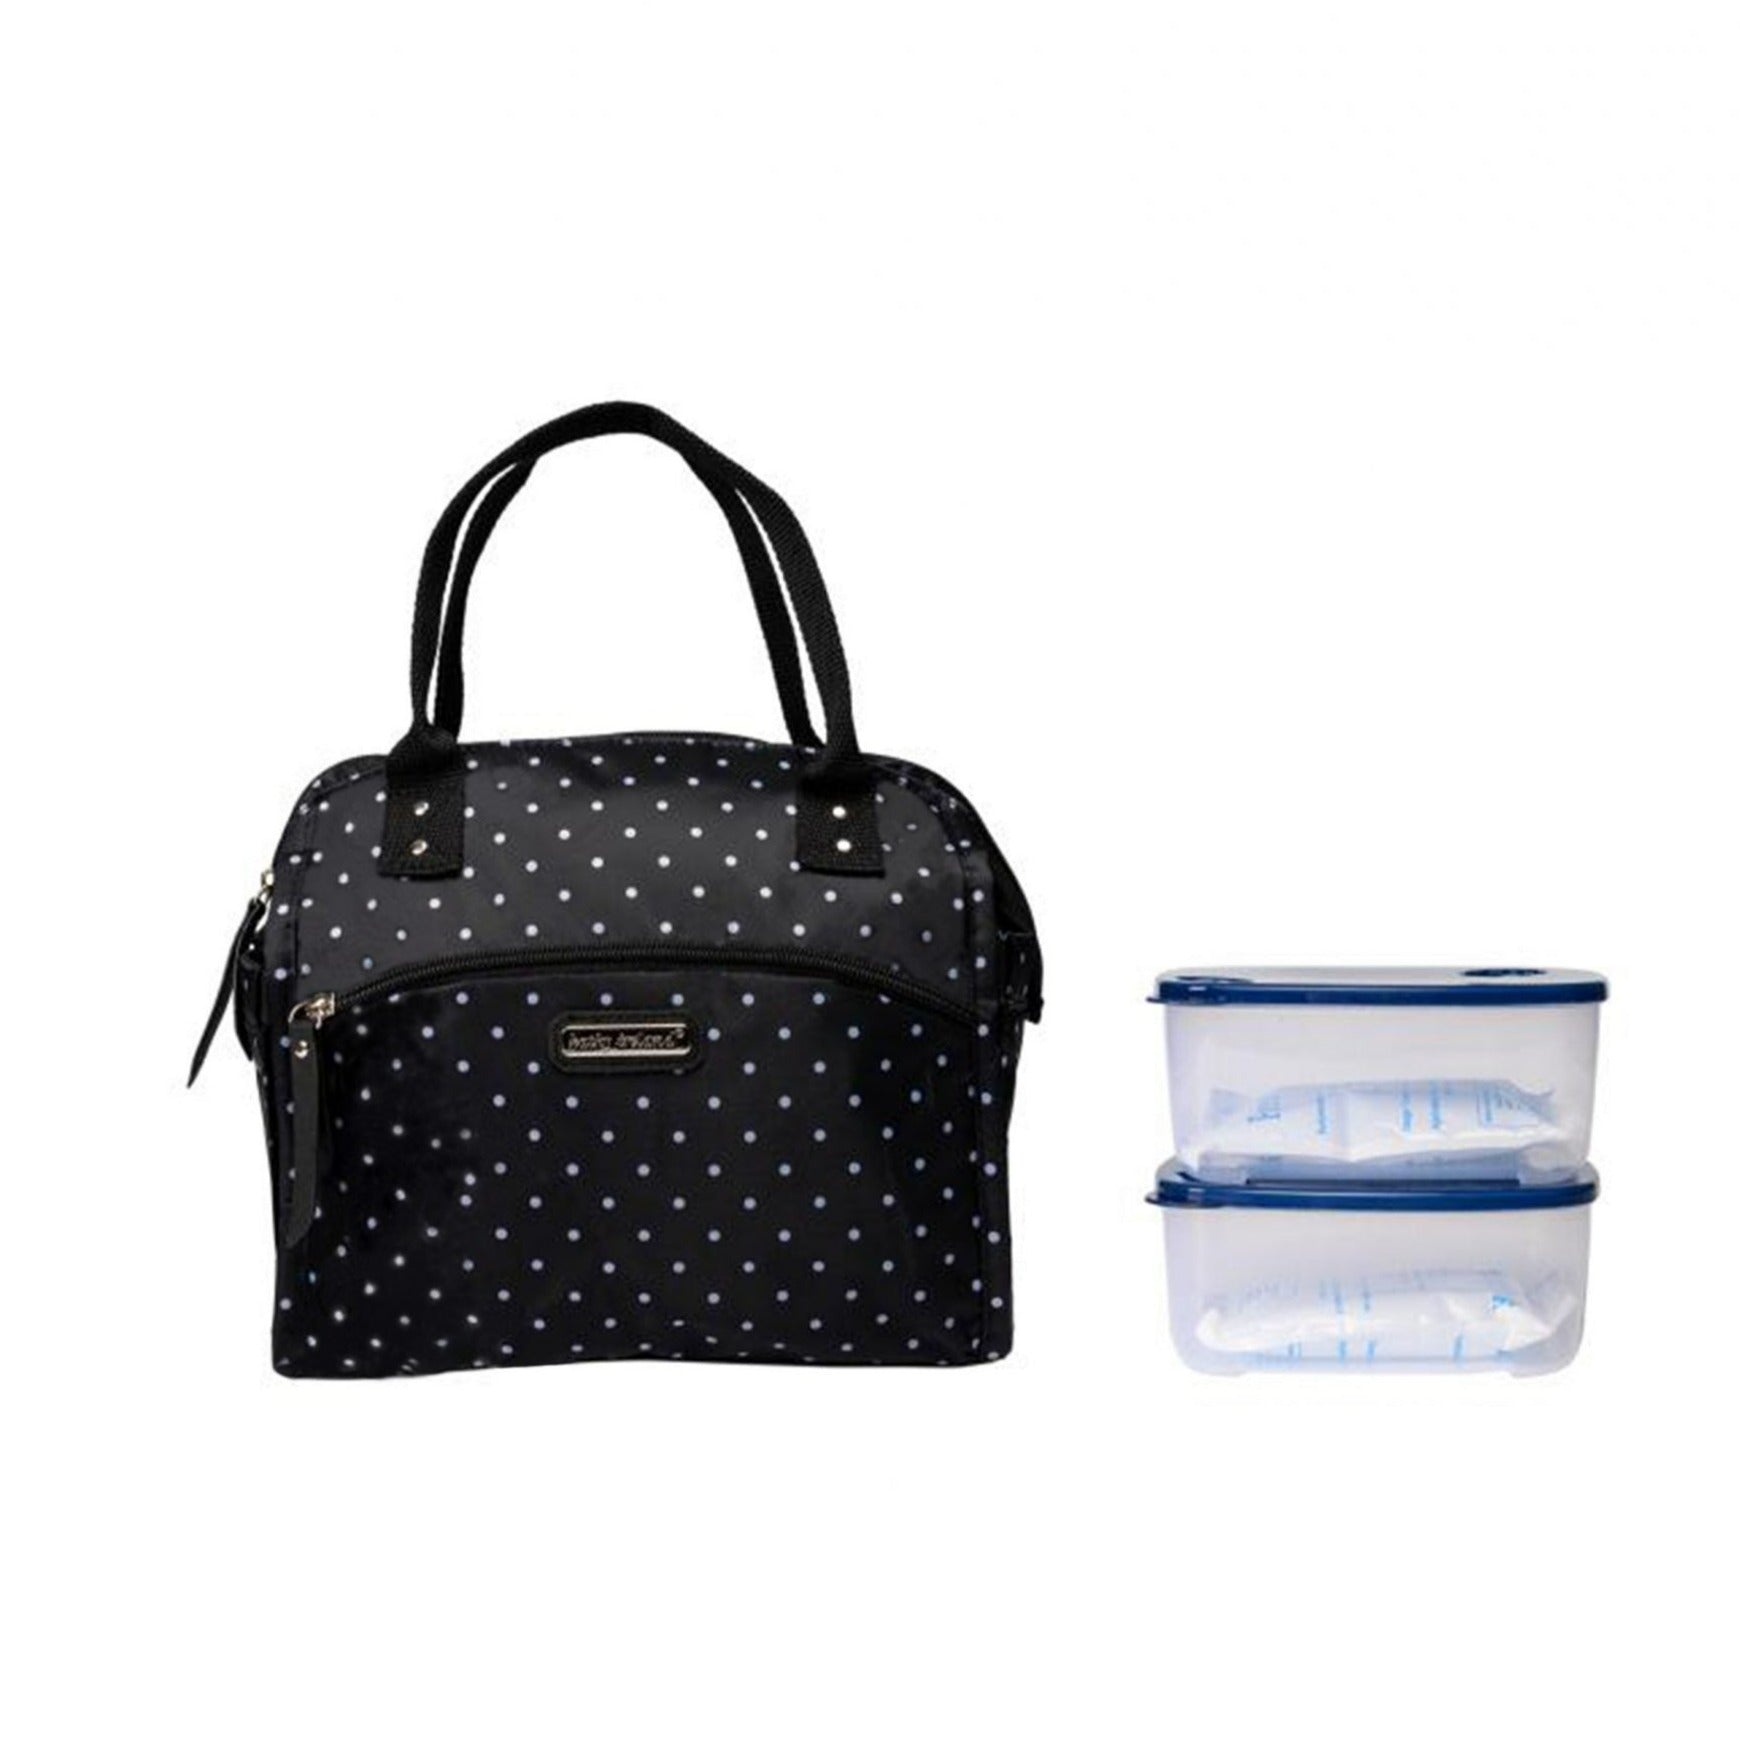 Kathy Ireland Leah Wide Mouth Lunch Tote Black White Polka Dot